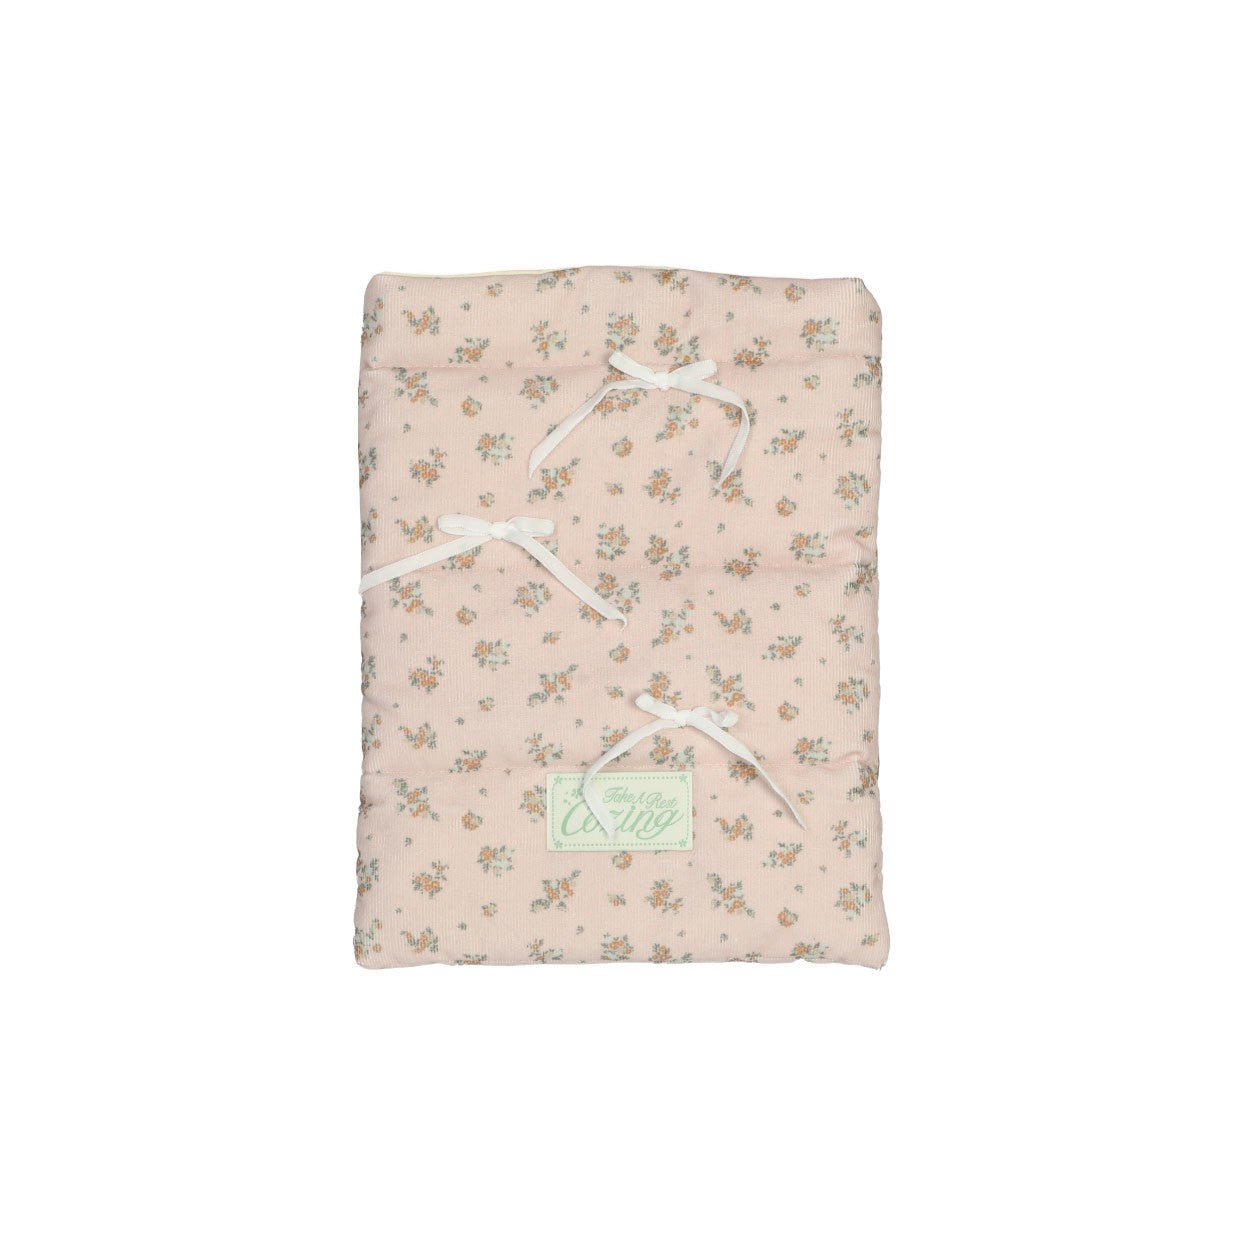 Cozing Pillow notebook pouch_Floral pink